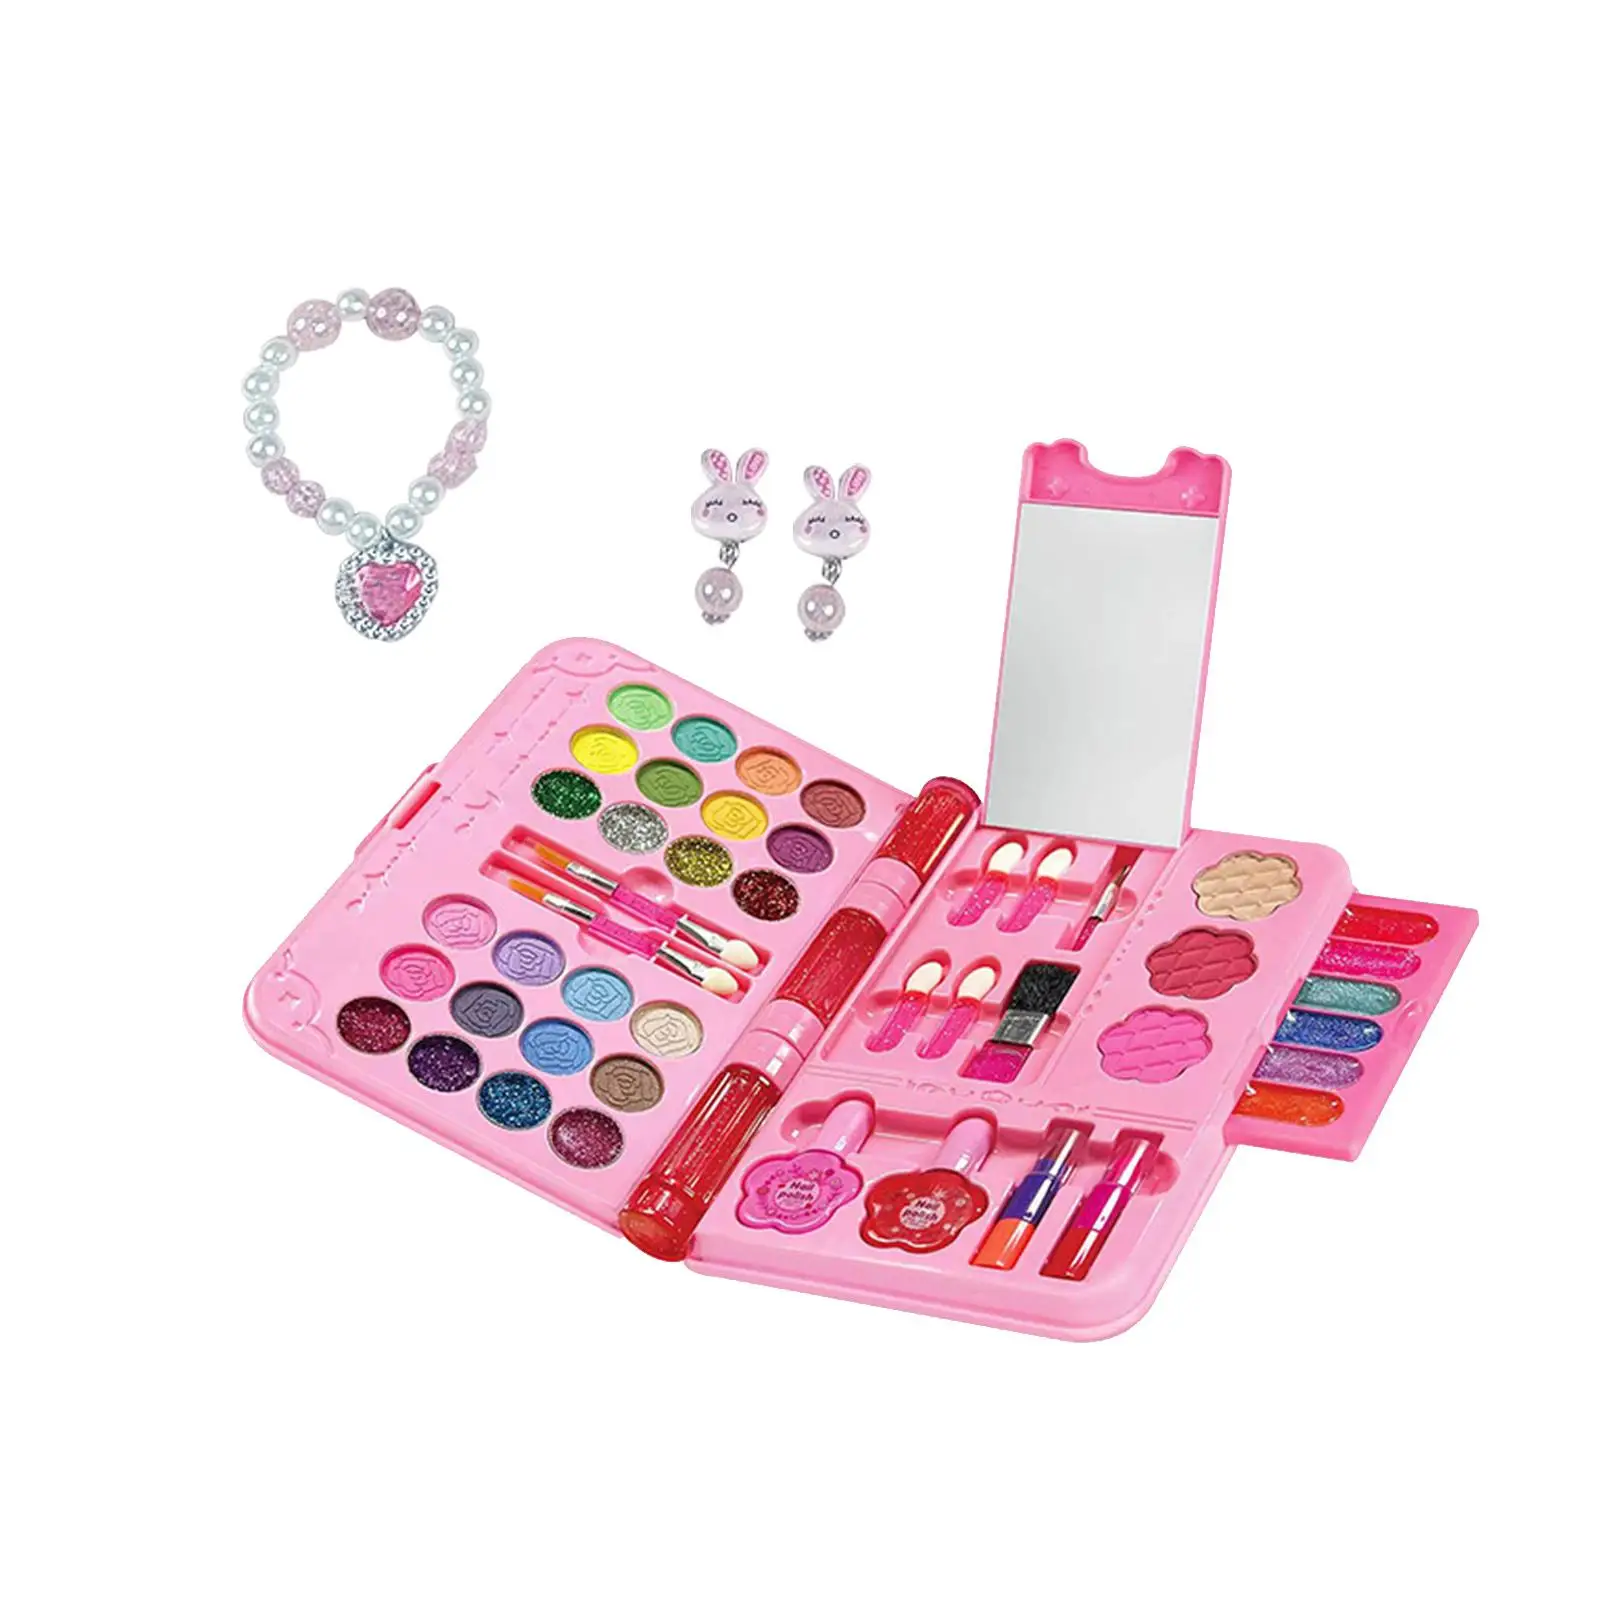 Children Makeup Playing Box, Cosmetics Makeup Toy Playset, Makeup Vanity Toy, Portable Pretend Play Makeup Toy Set for Toddlers